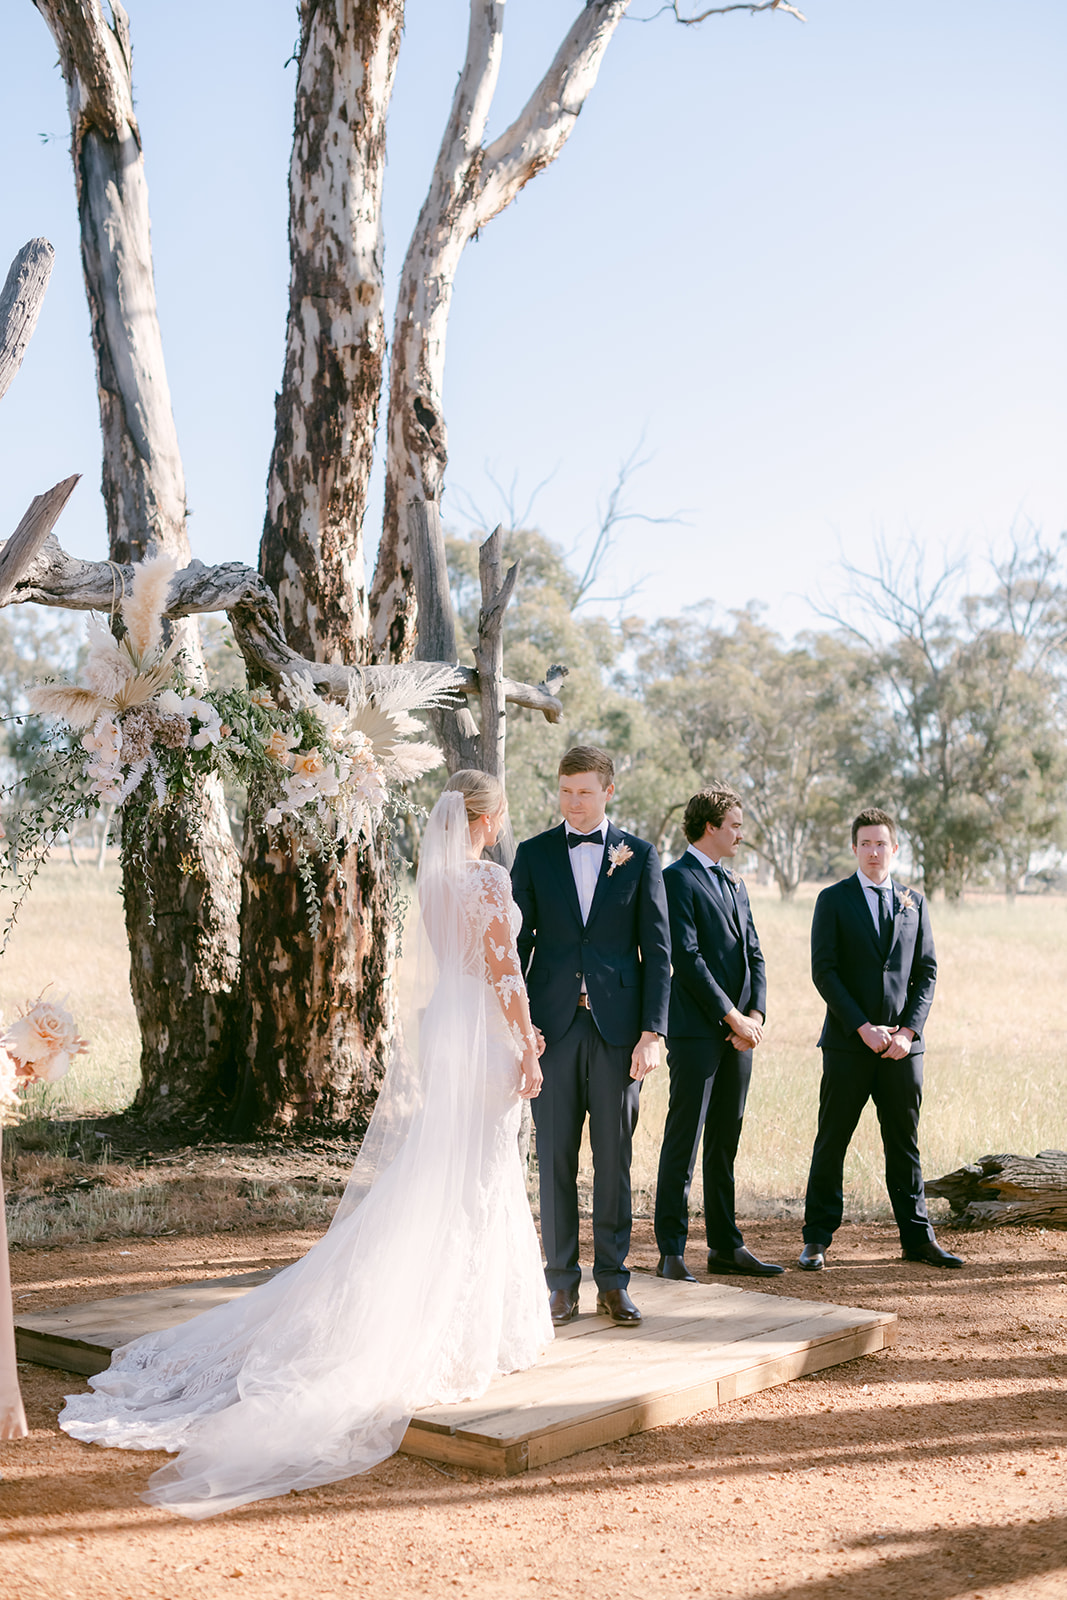 Perth and Wheatbelt wedding photographer. Editorial, documentary wedding photos by Bird on the wall Photography at Barton Park events